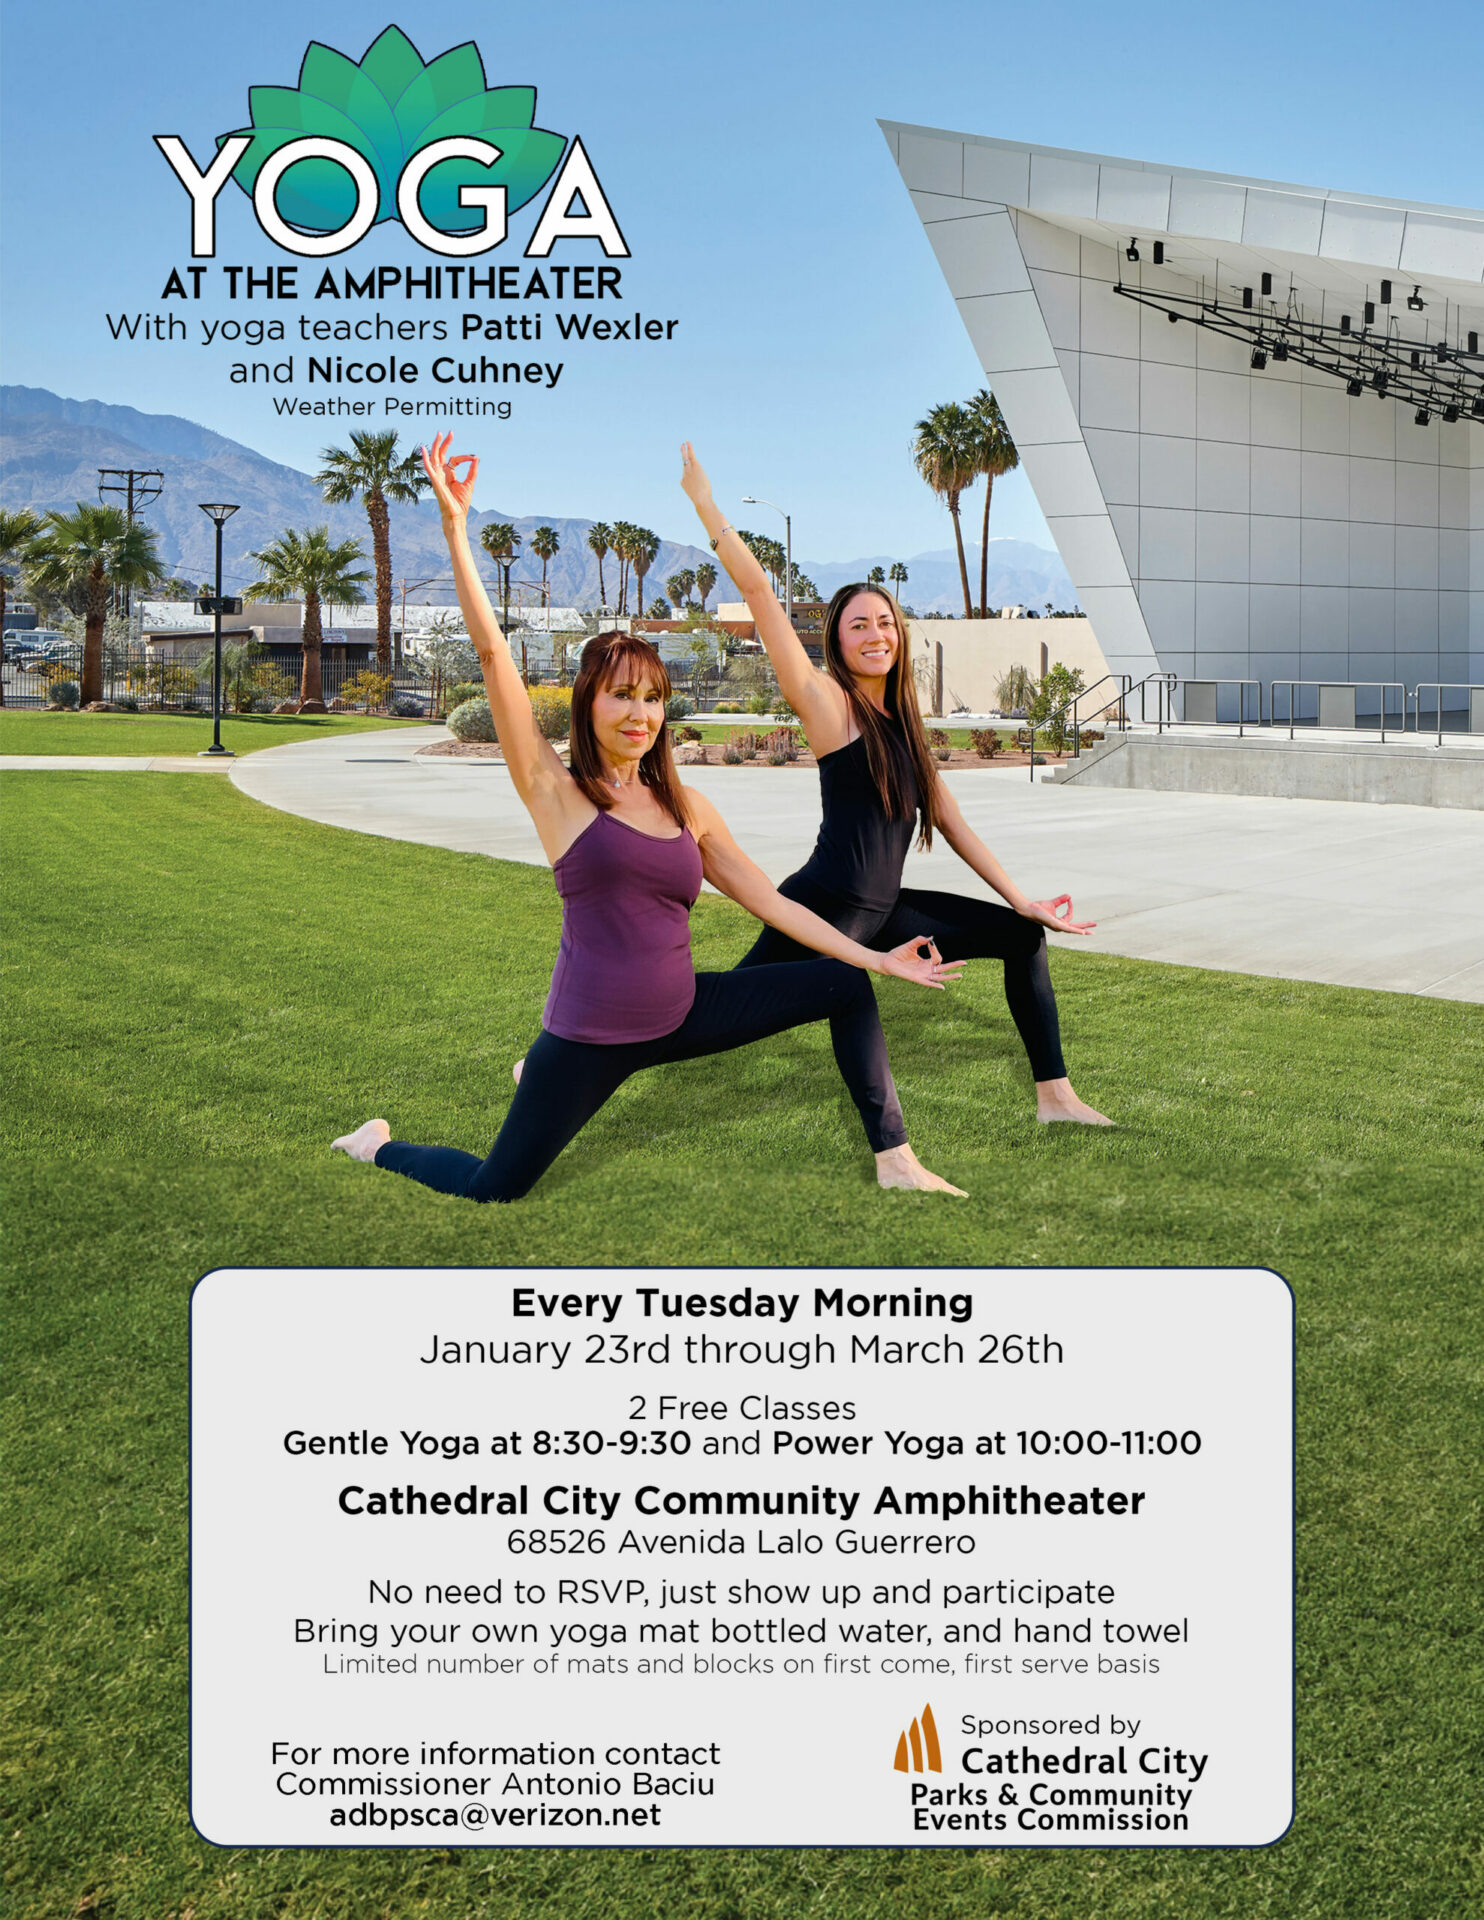 Yoga at the Amphitheater